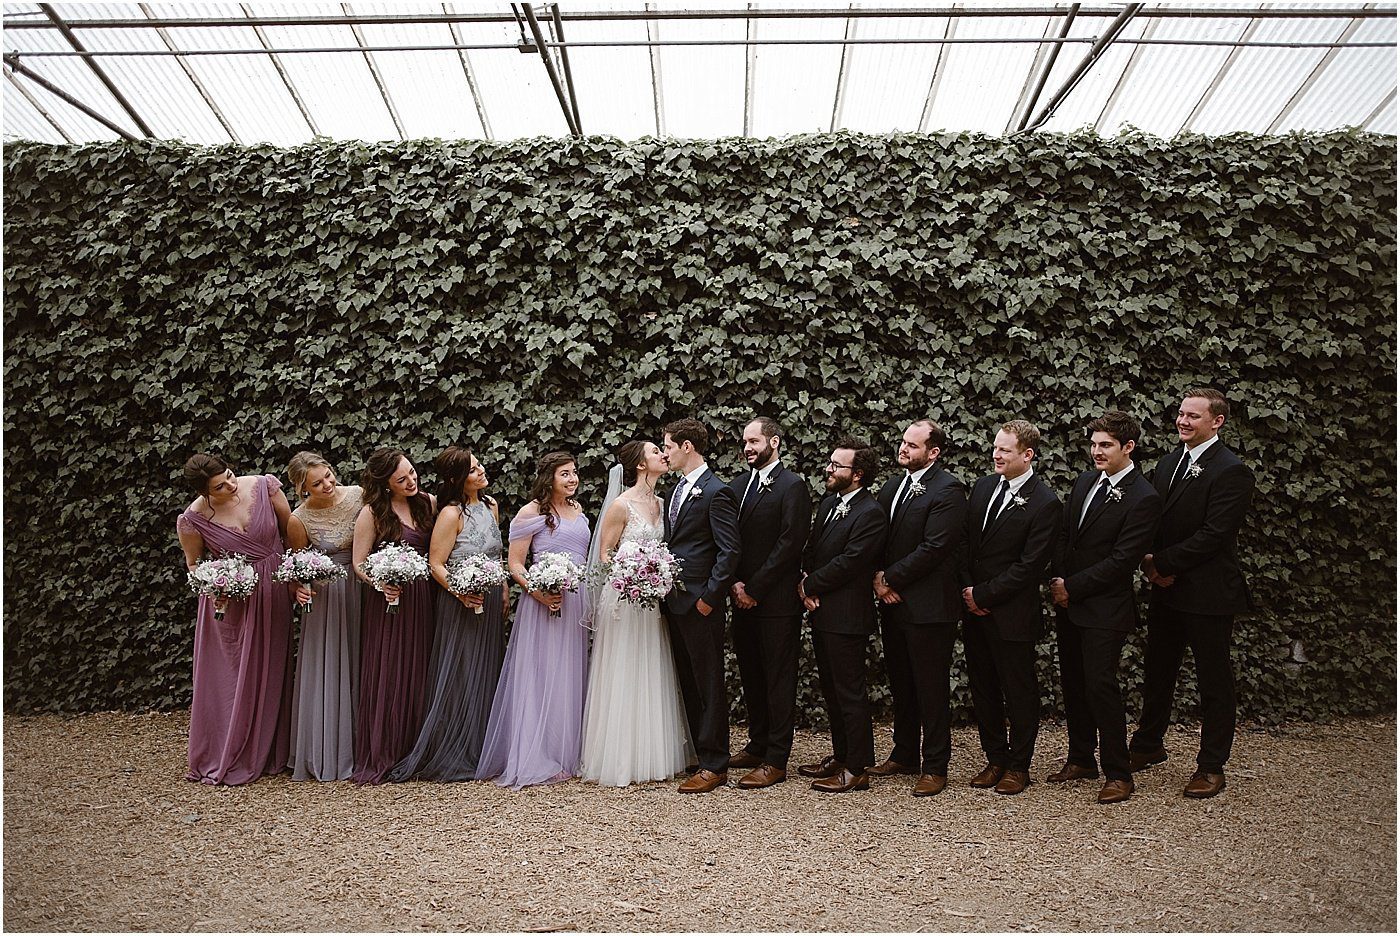 Weddings at the Knoxville Botanical Gardens